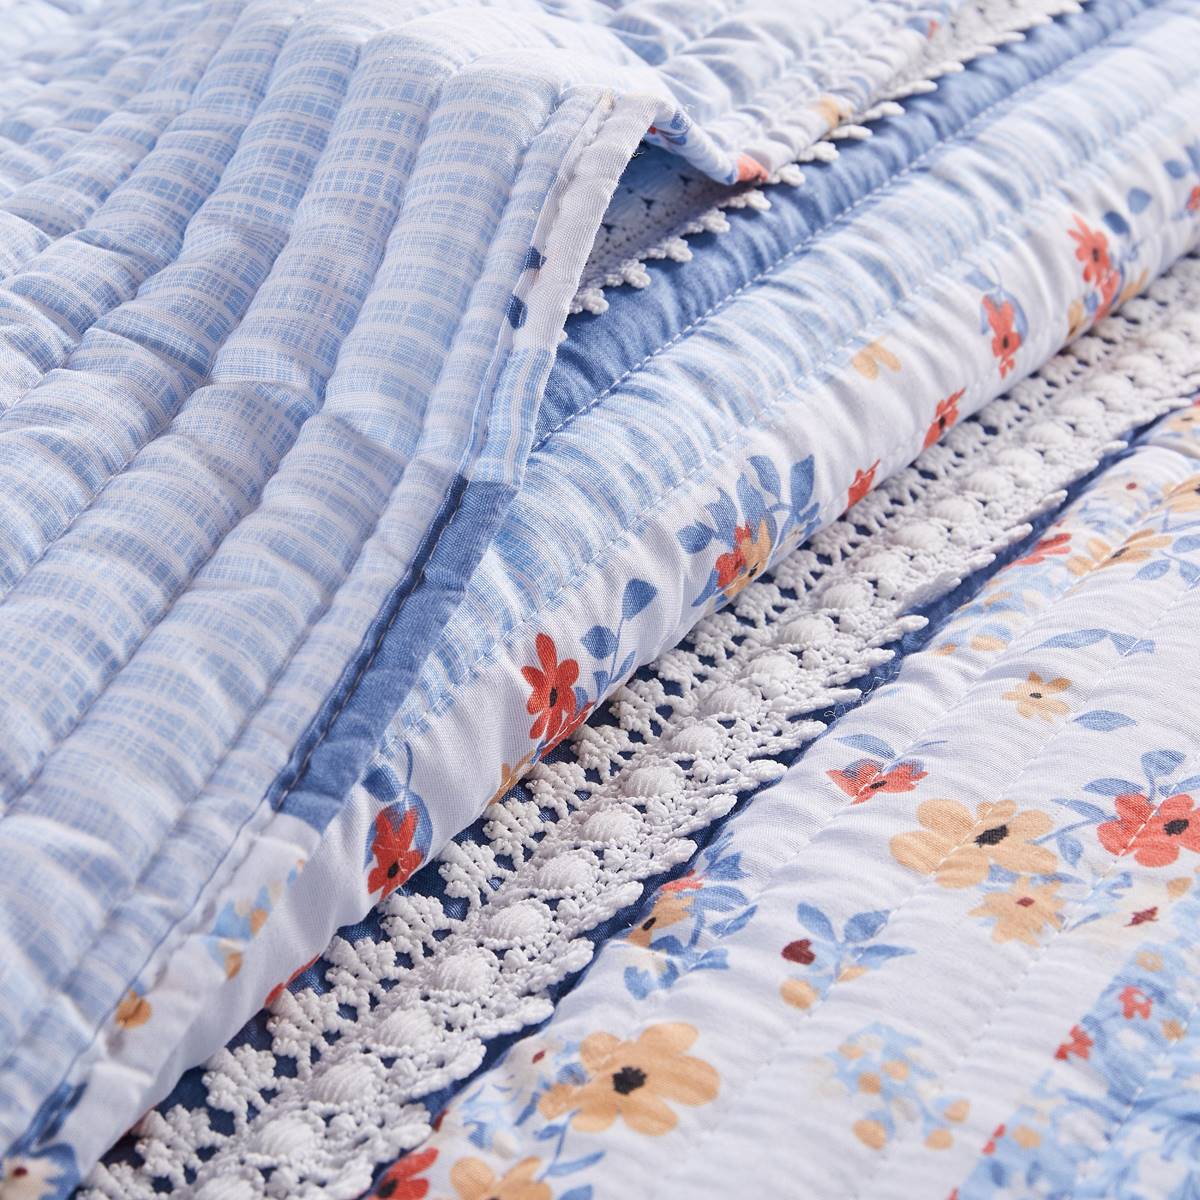 Greenland Home Fashions(tm) Betty Lace-Embellished Quilt Set